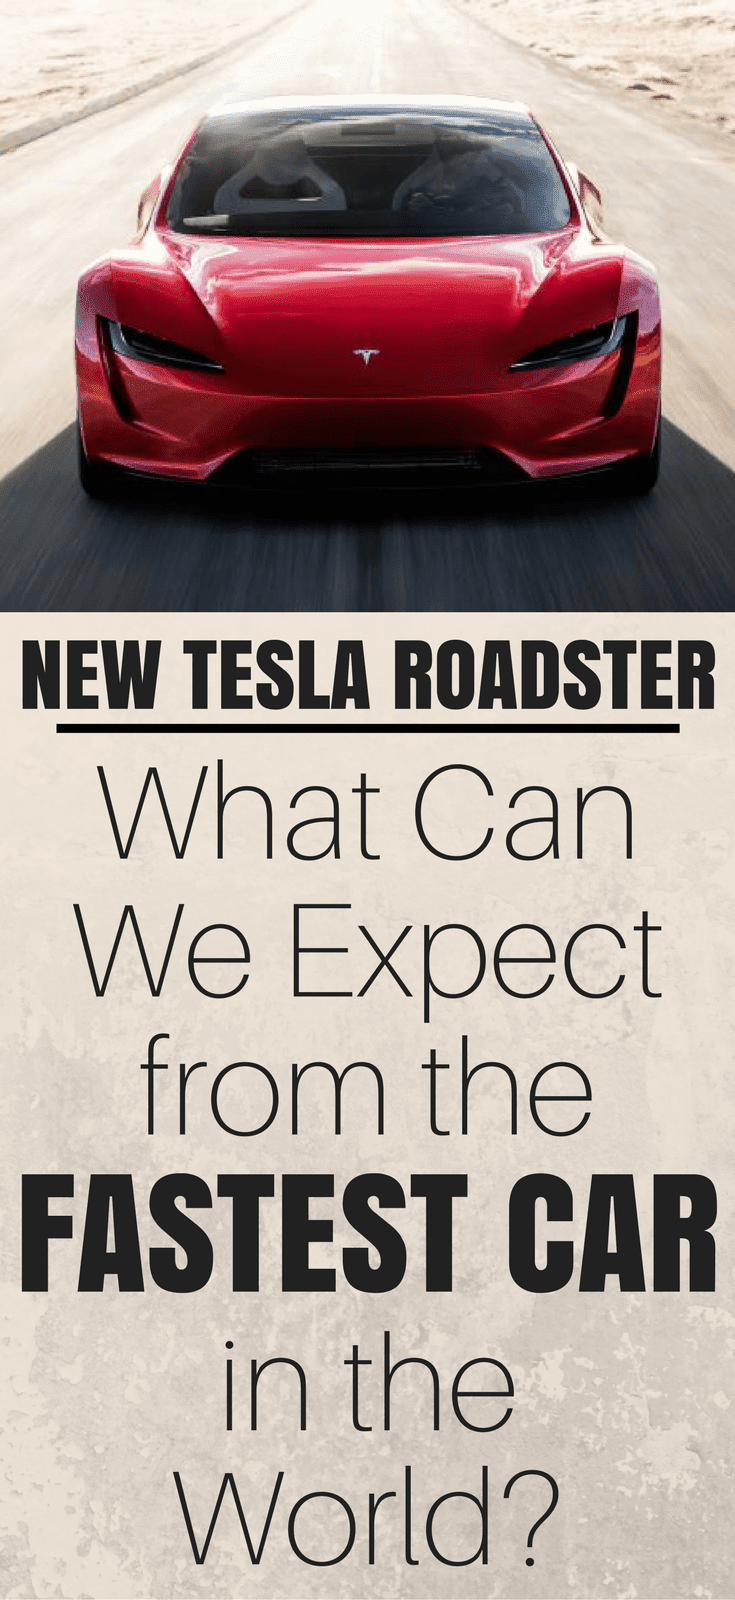 New Tesla Roadster - What Can We Expect from the Fastest Car In The World?